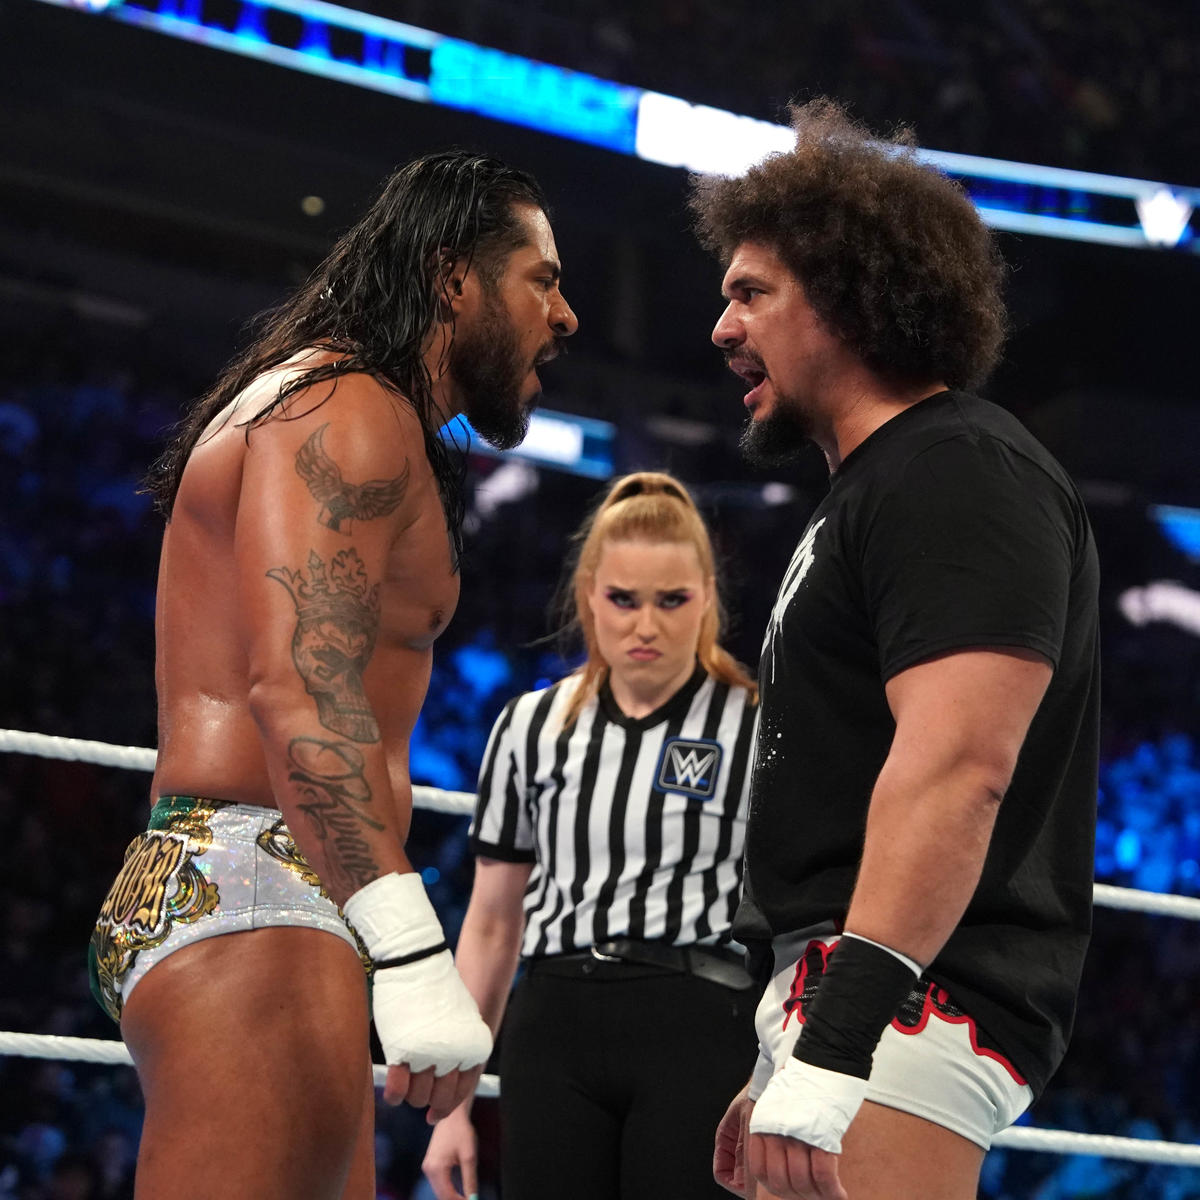 Two WWE wrestlers looking angrily at each other before a match. The referee stands in the background scowling.